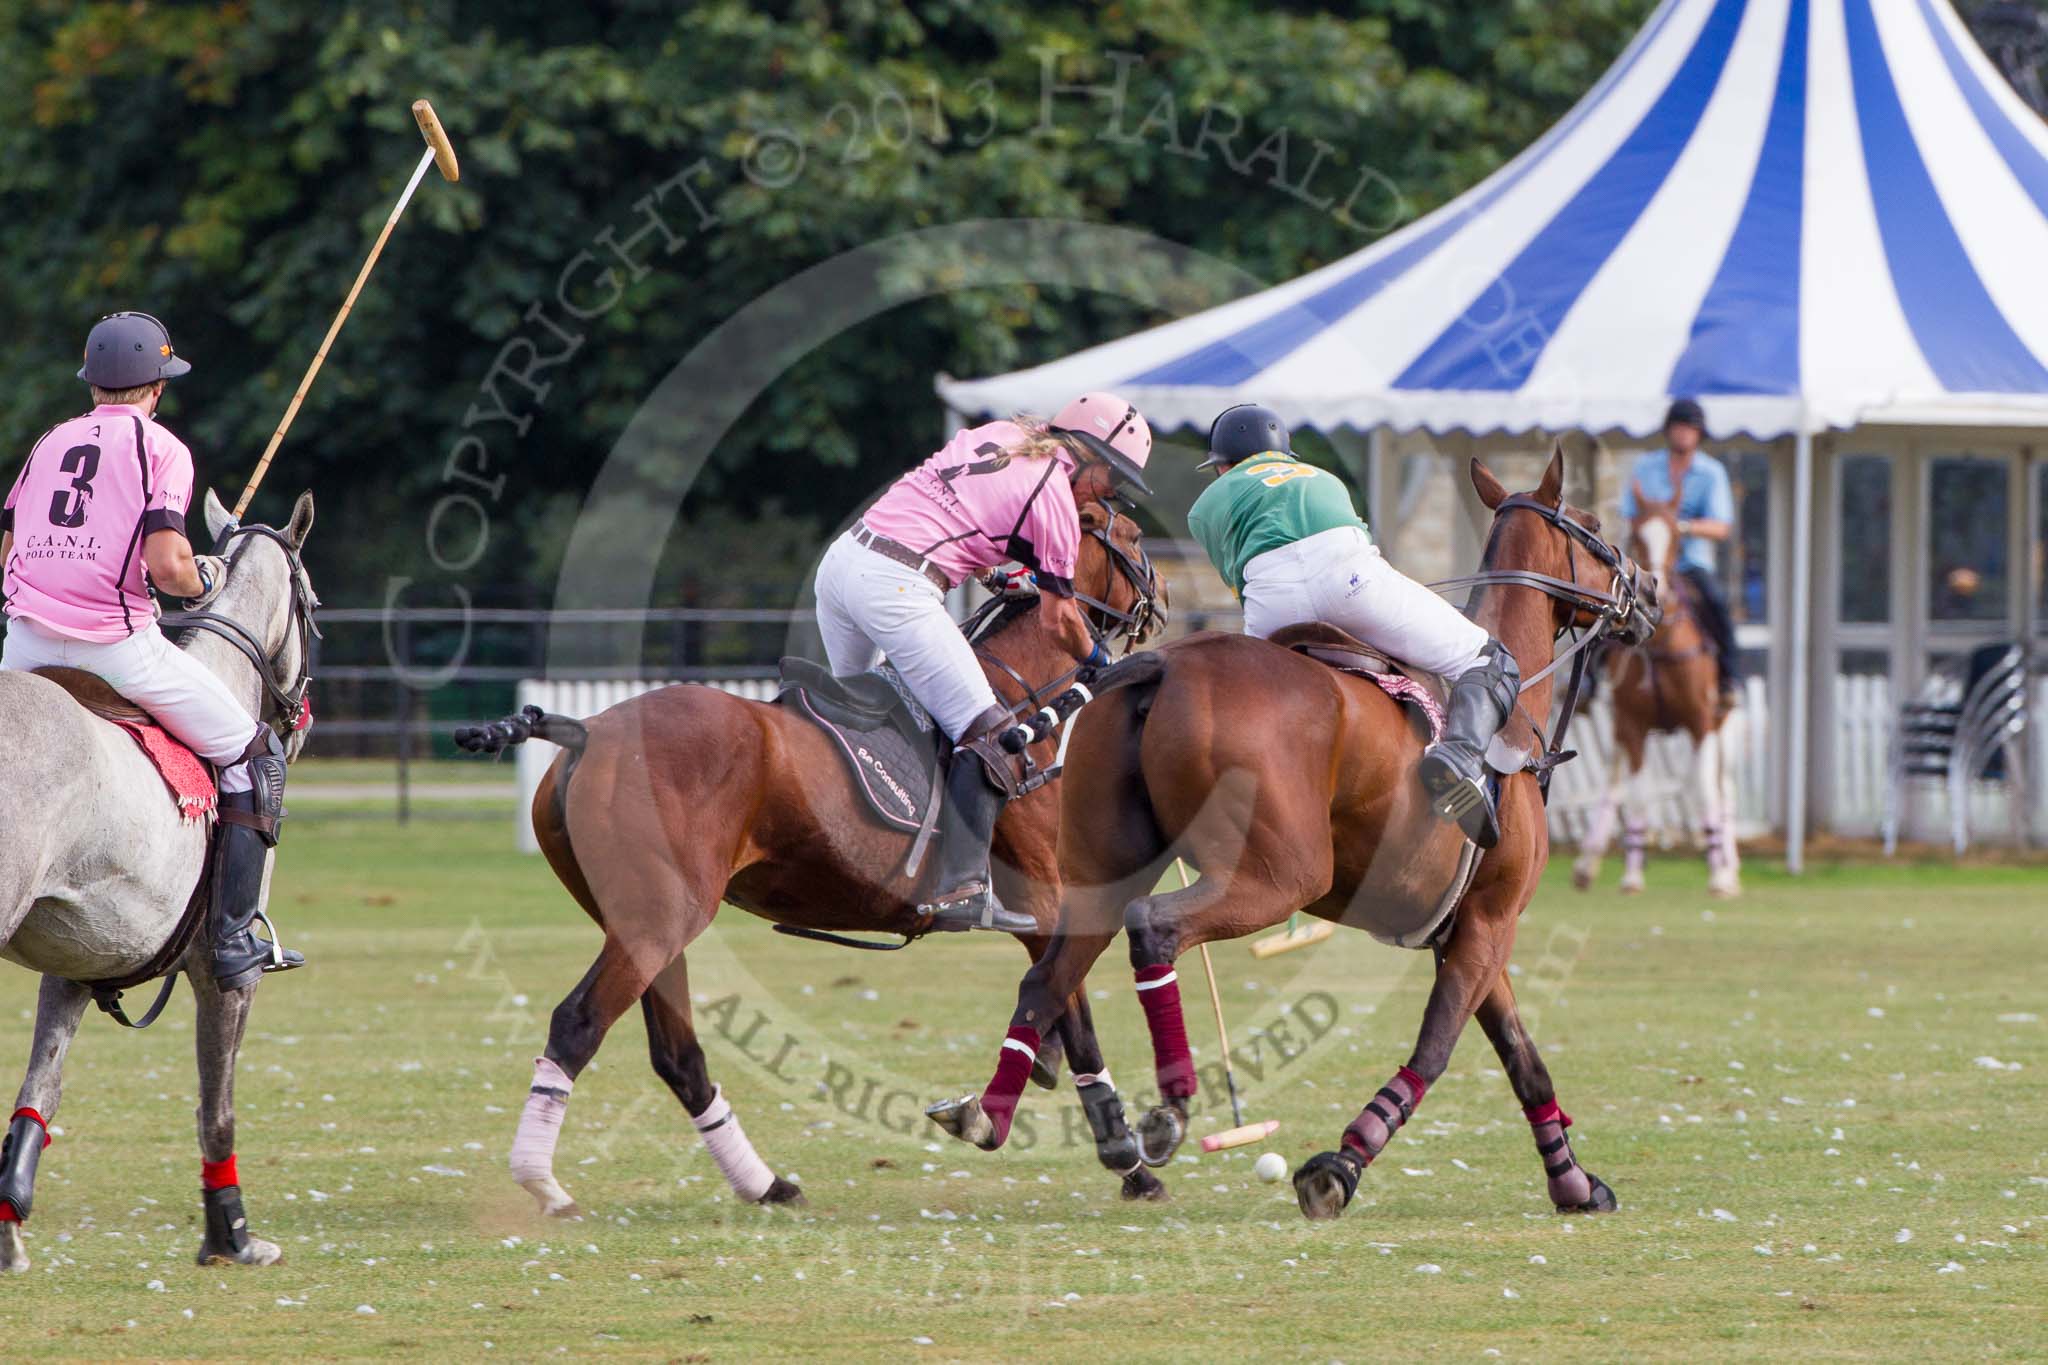 DBPC Polo in the Park 2013, Final of the Tusk Trophy (4 Goals), Rutland vs C.A.N.I..
Dallas Burston Polo Club, ,
Southam,
Warwickshire,
United Kingdom,
on 01 September 2013 at 16:40, image #608